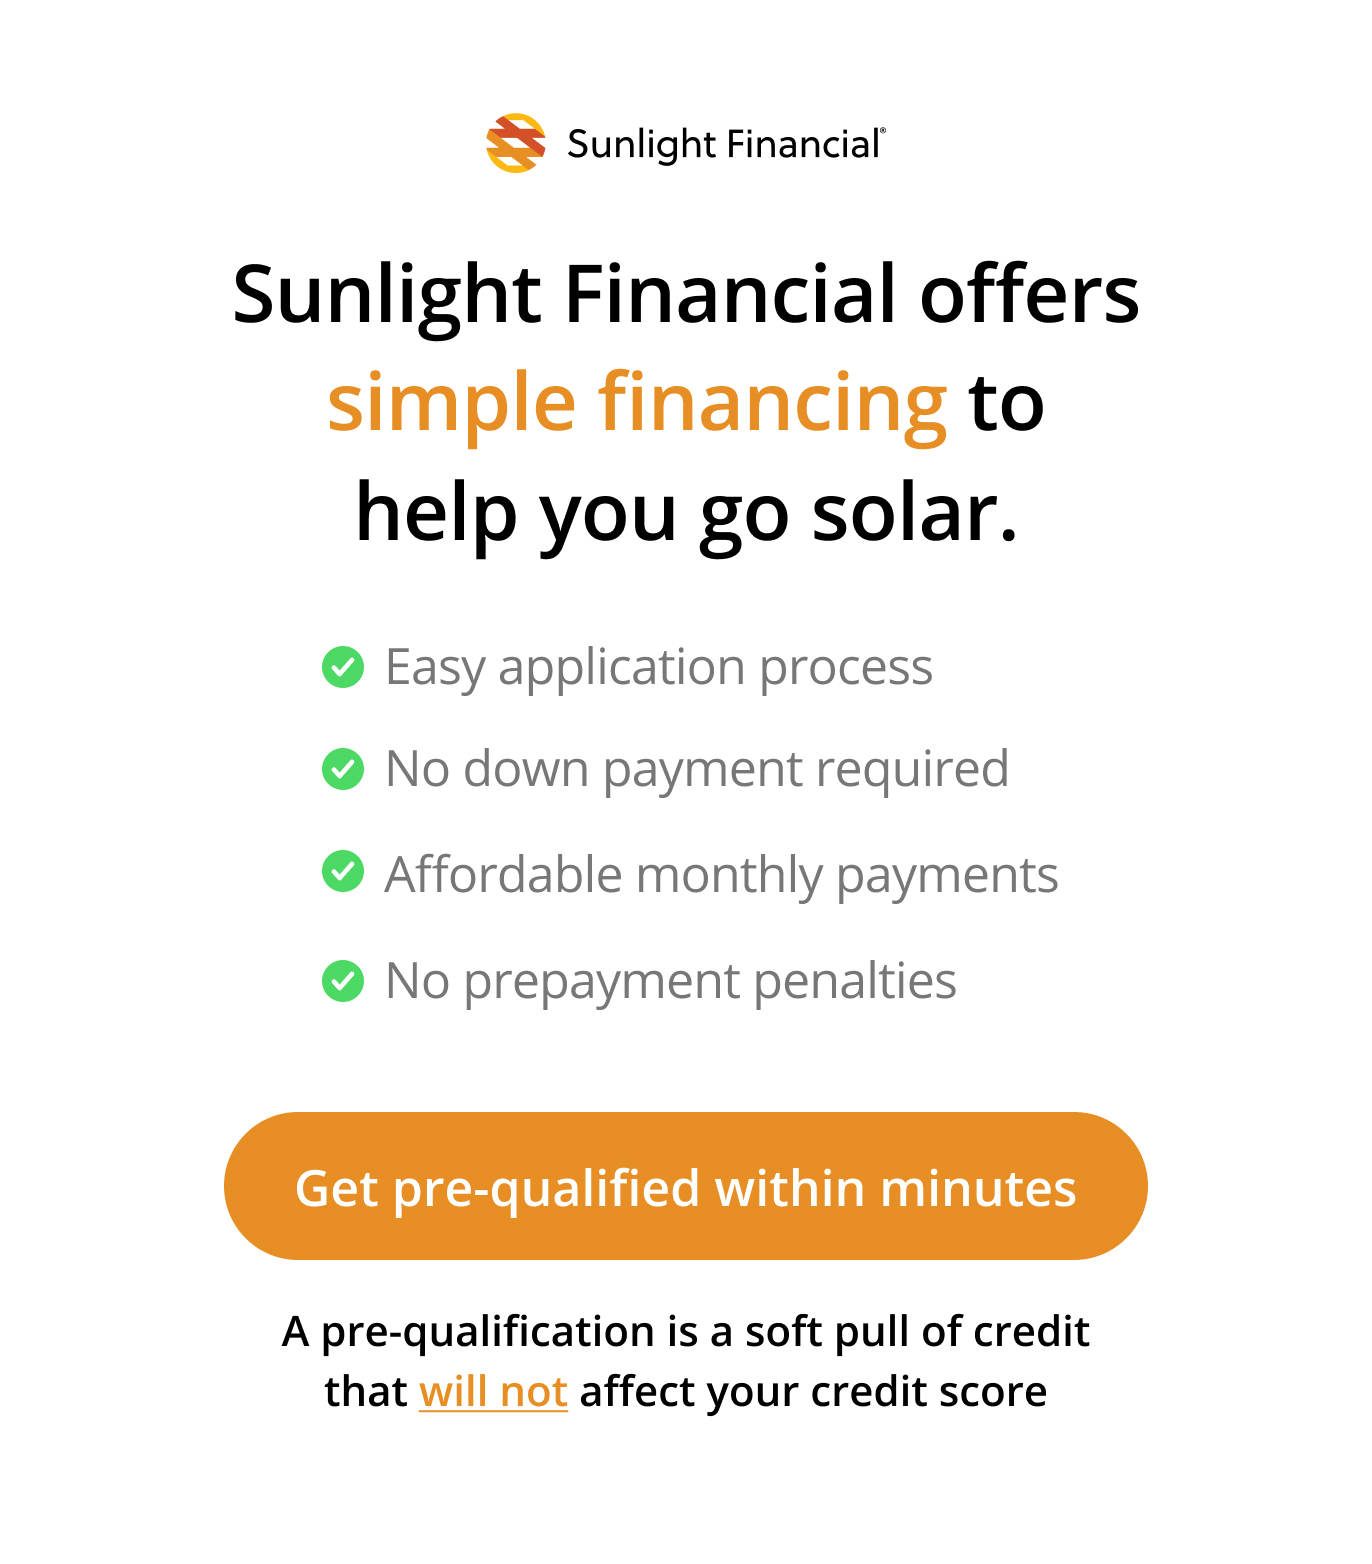 Get Pre-Qualified For A Sunlight Financial Loan